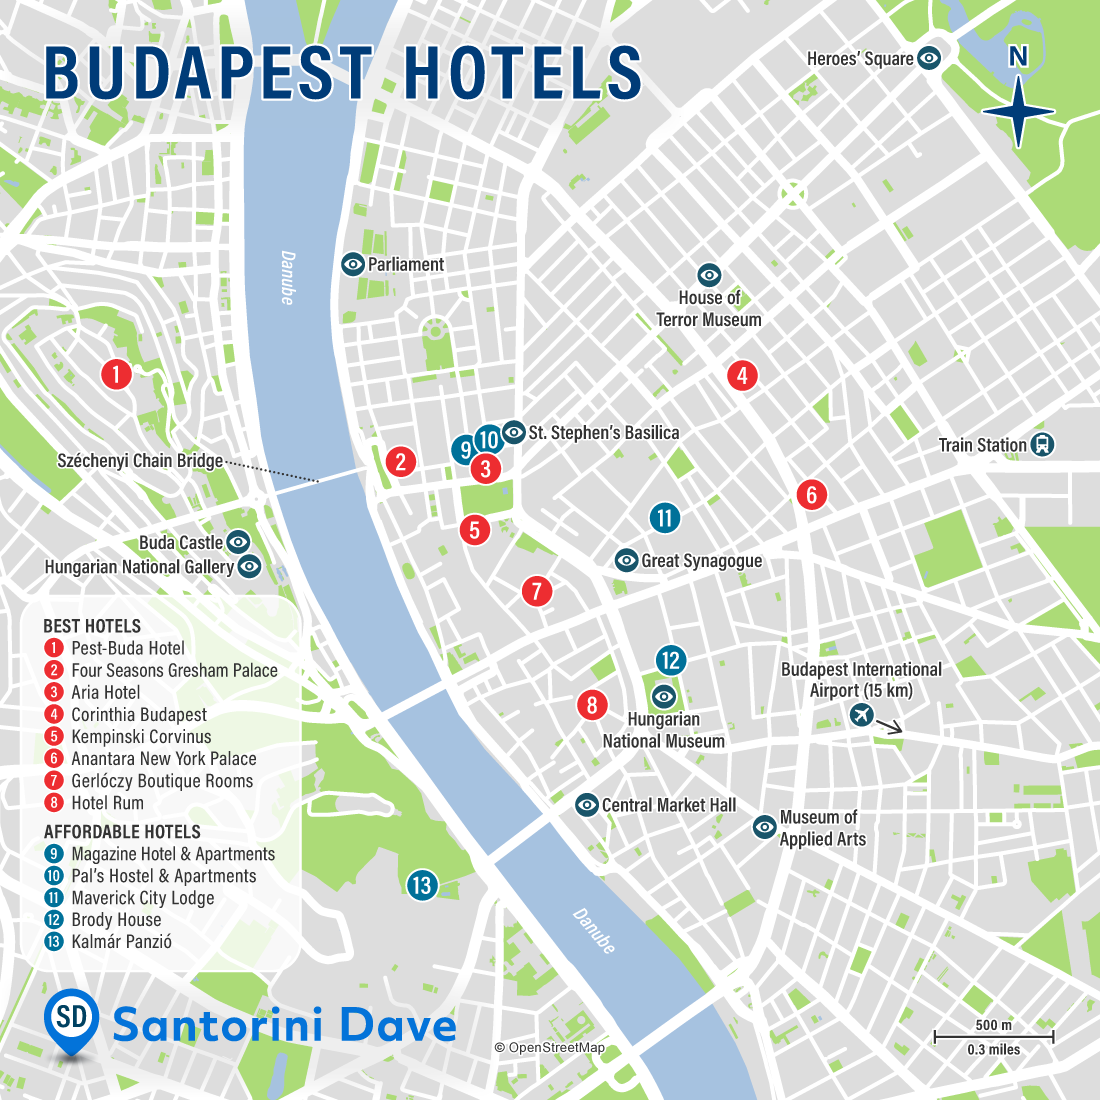 Map of Budapest Hotels and Attractions